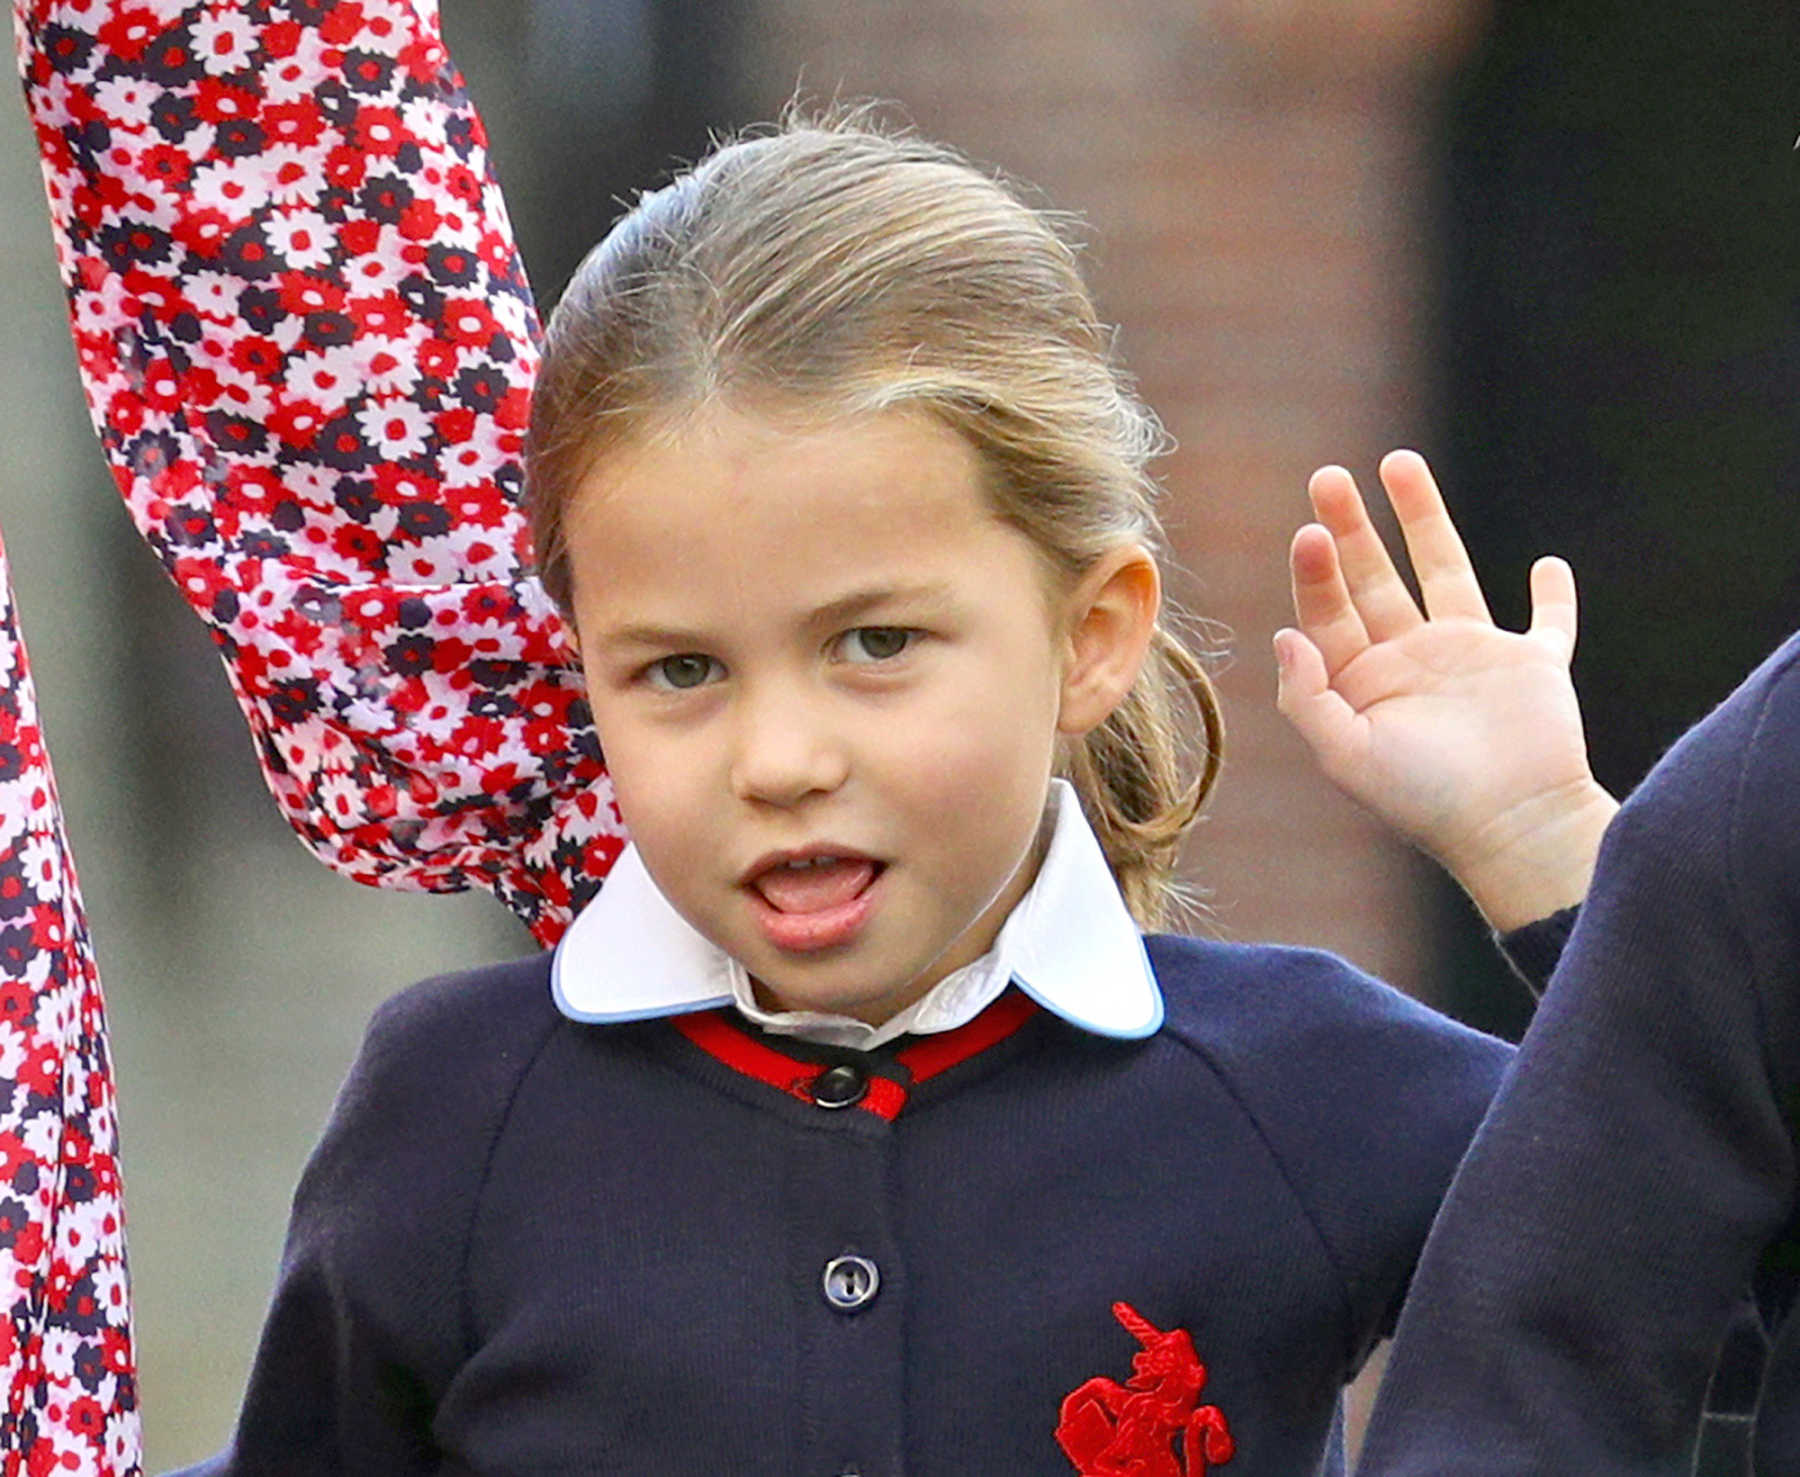 Meghan Markle's strong bond with Princess Charlotte eased tensions